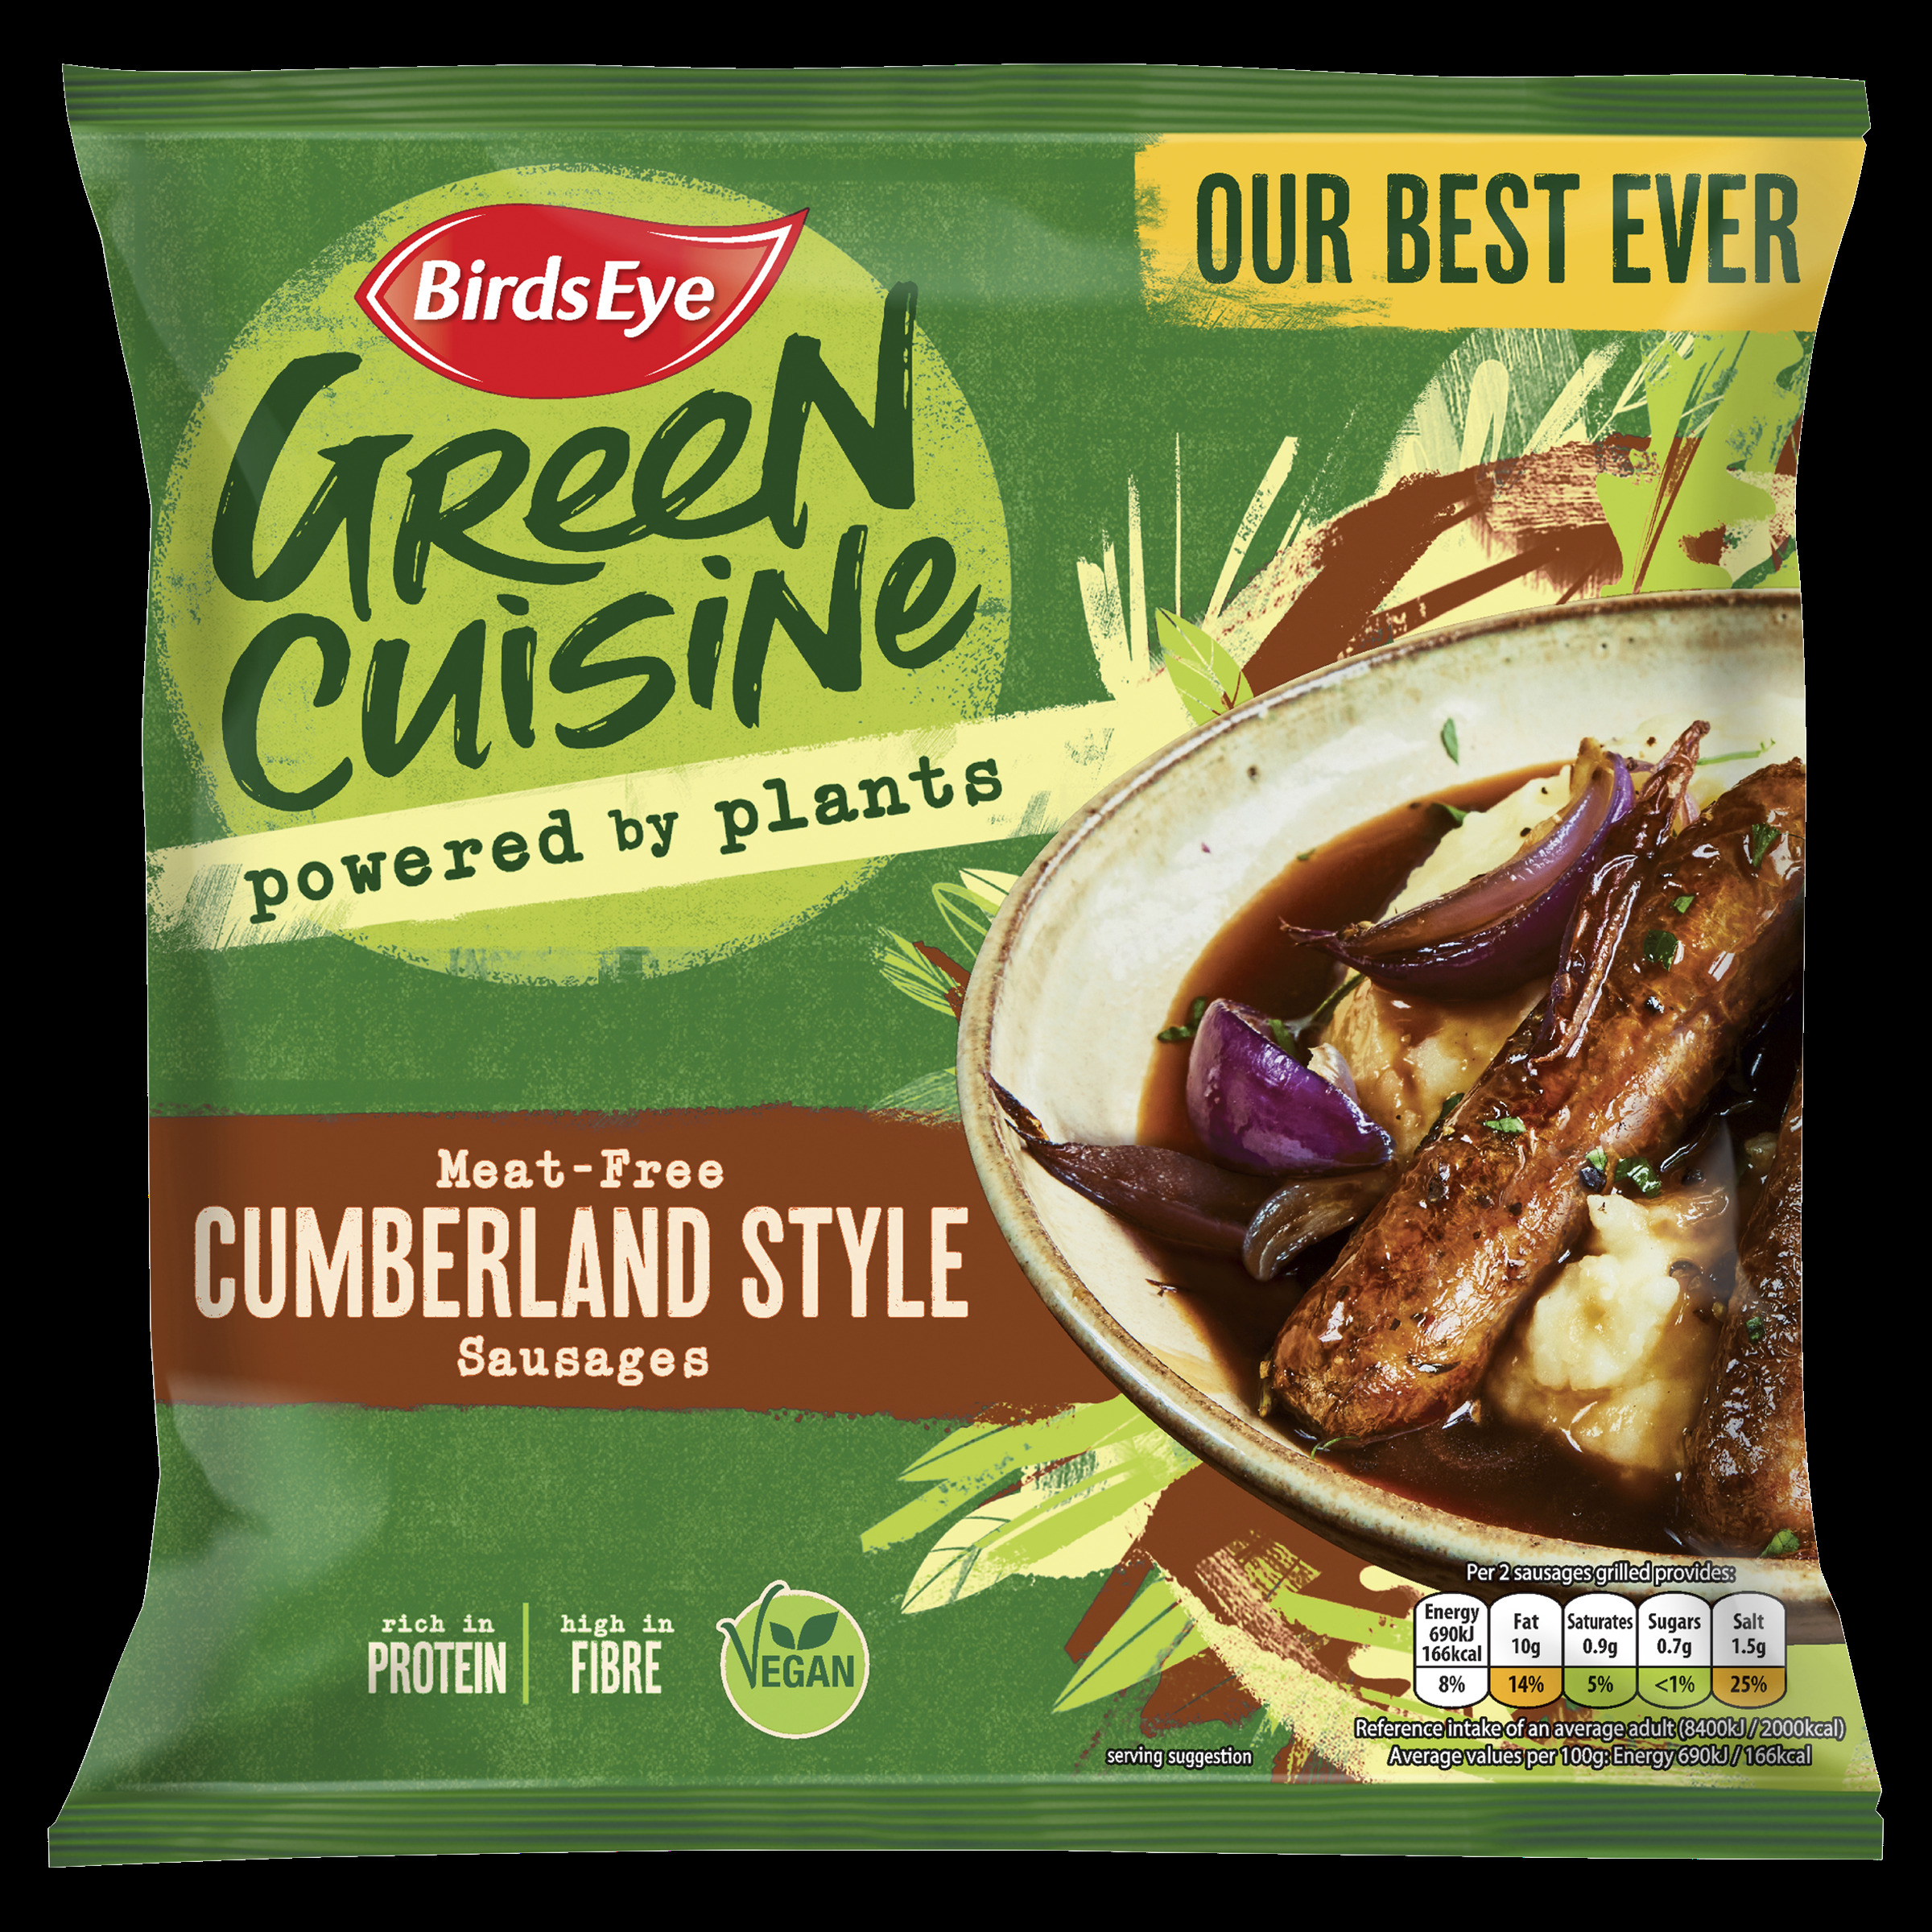 Birds Eye launches improved ‘Cumberland-style’ meat-free sausages